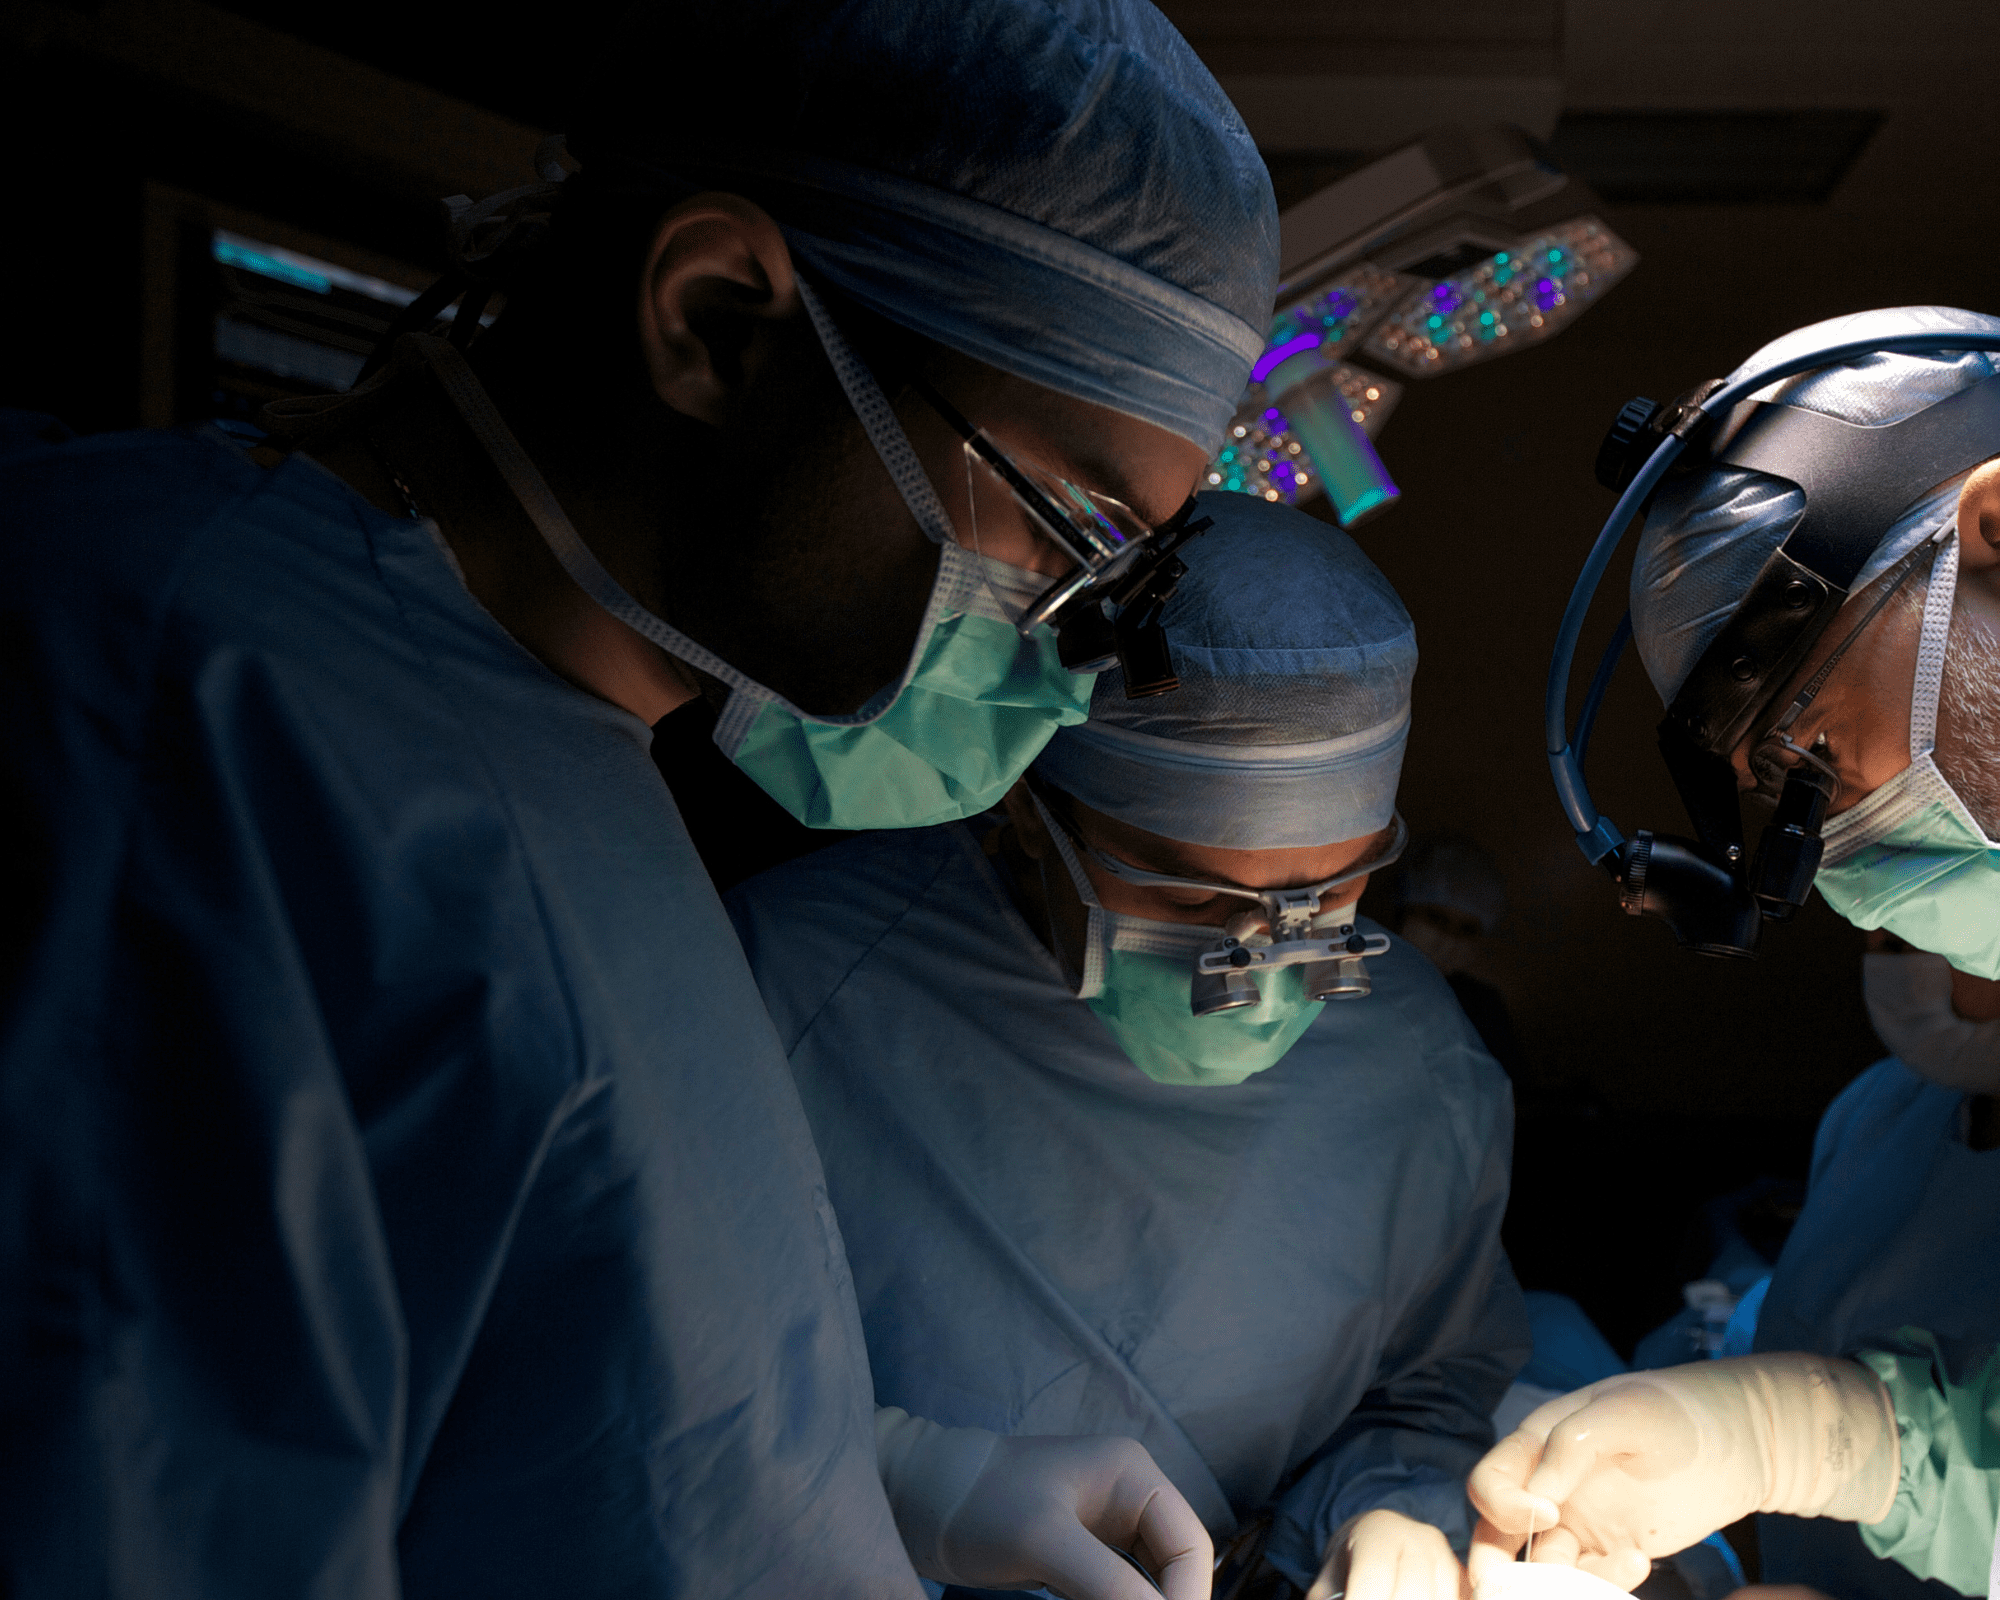 Pushing the boundaries of precision surgery with new technology